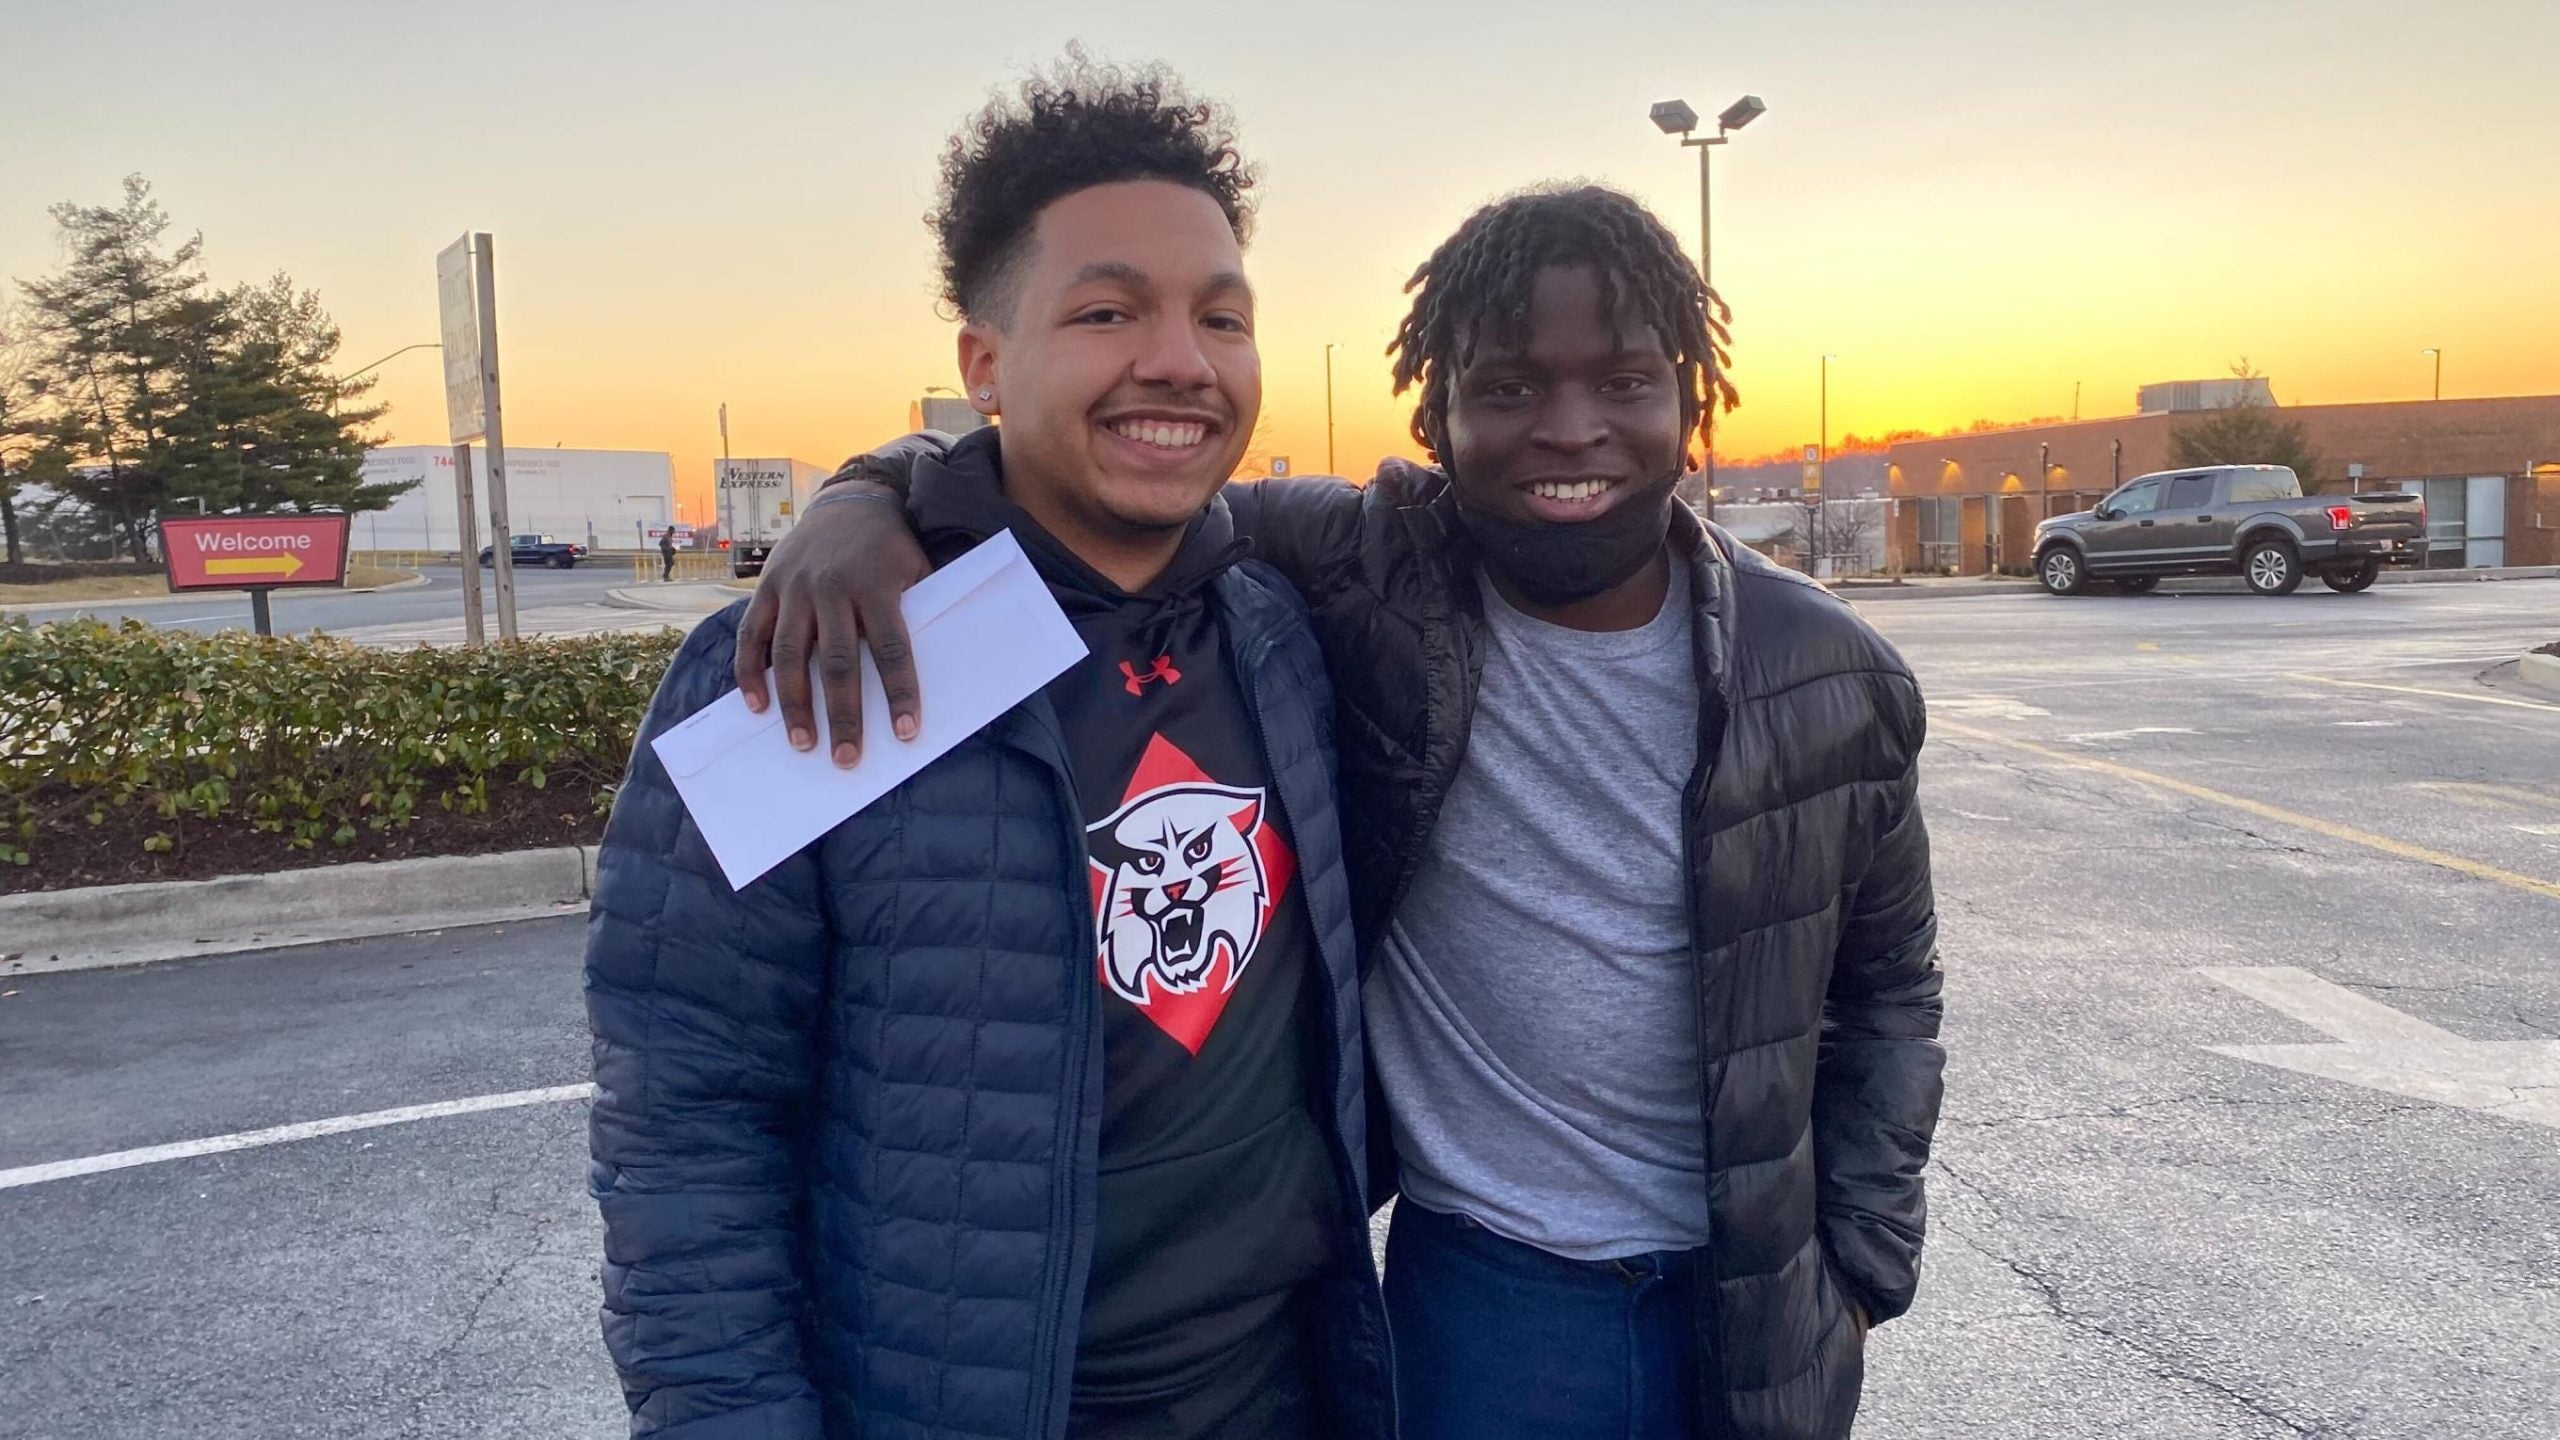 A Childhood Friendship Inspired A Community To Help Free A Young Black Man